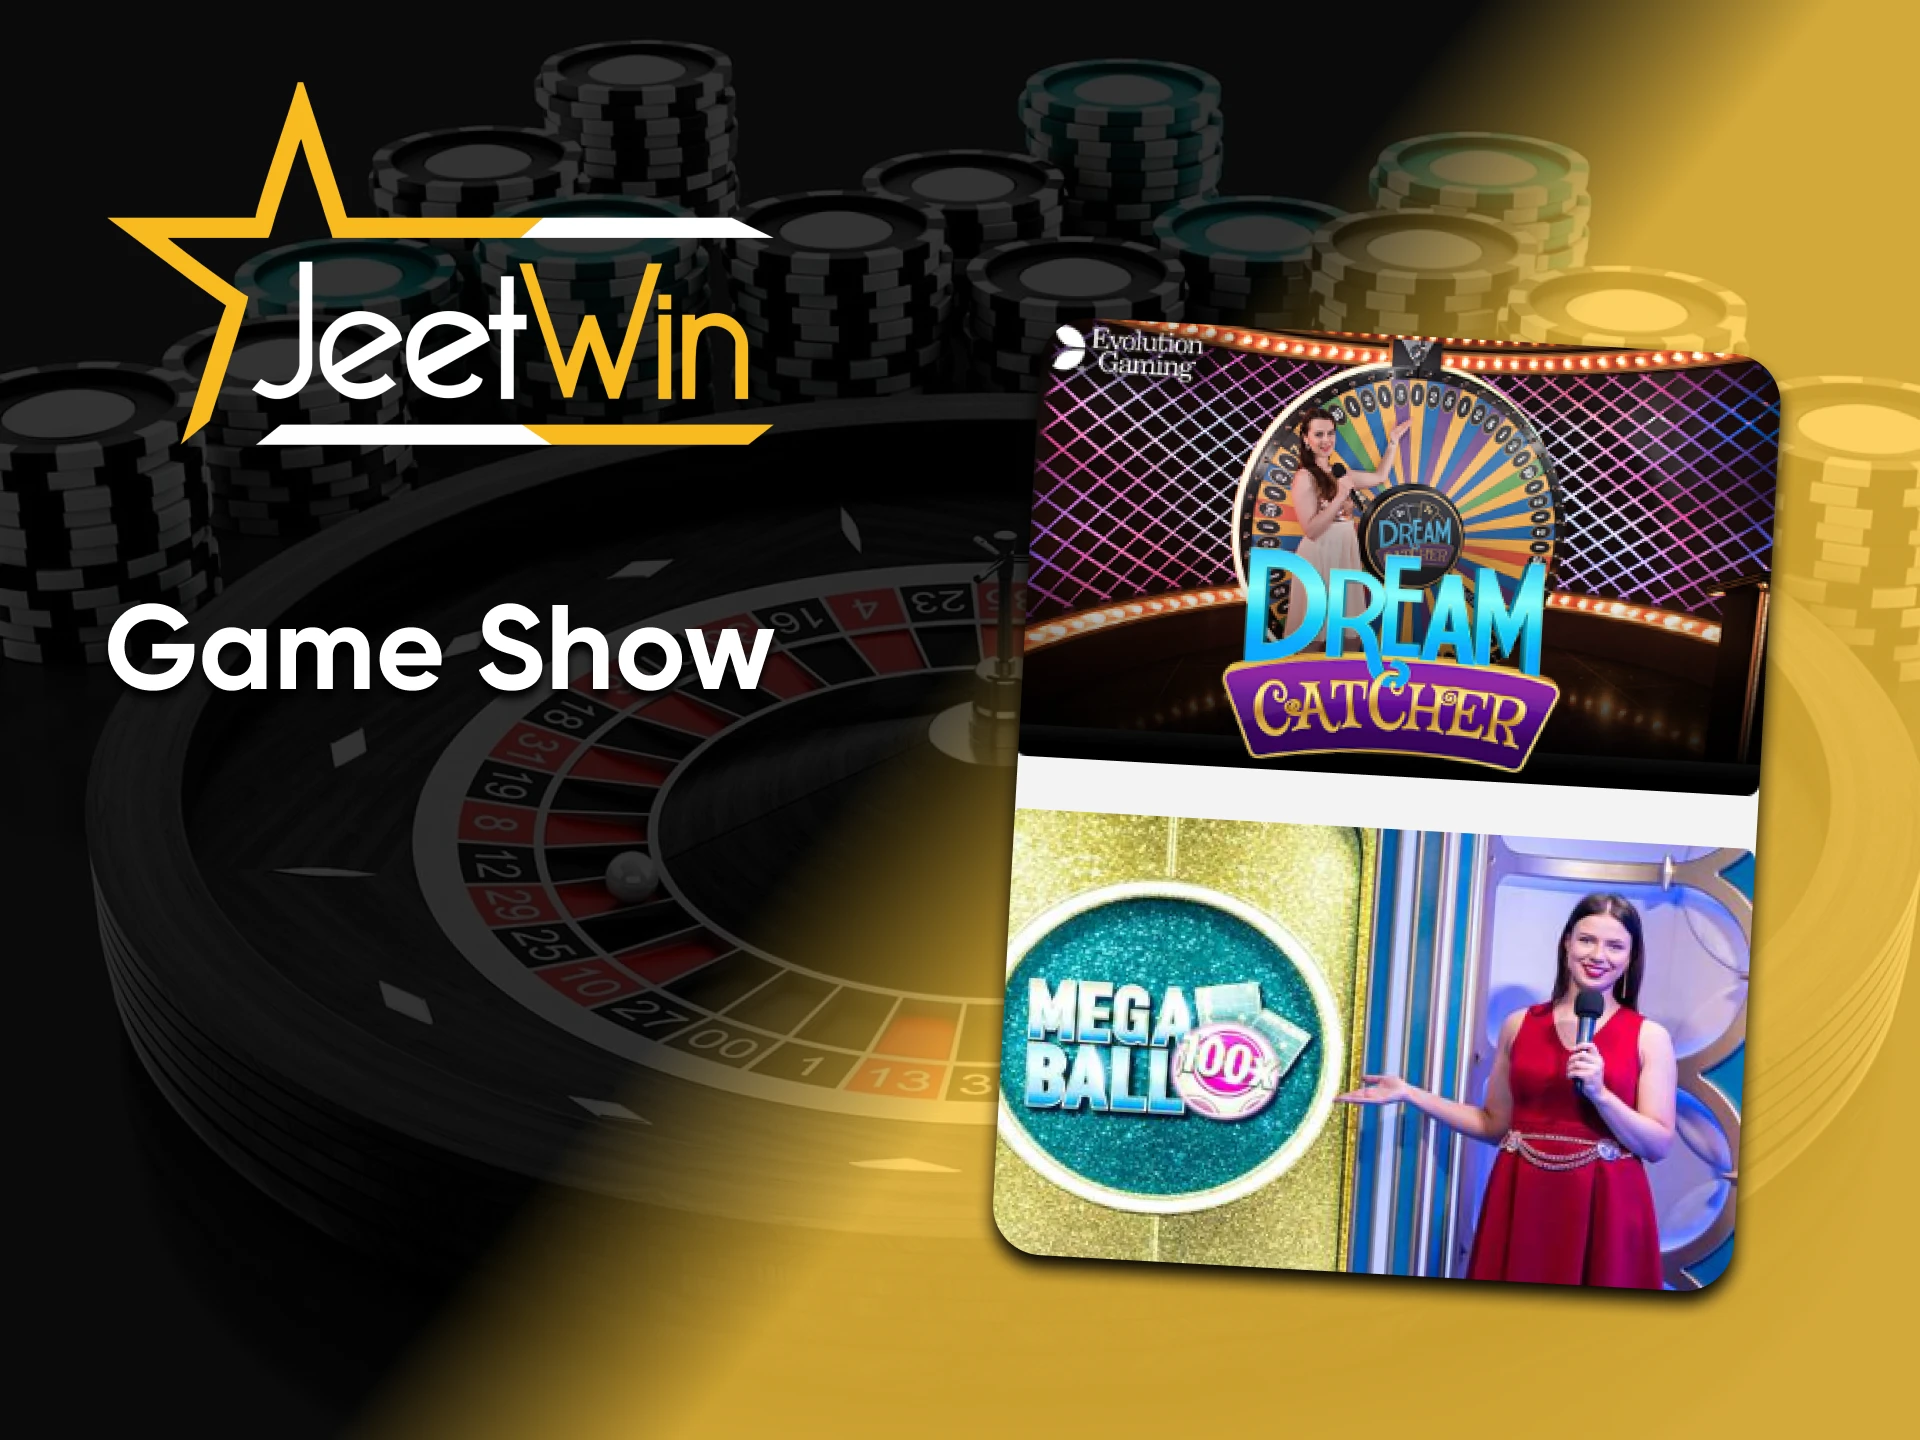 To play Game Show, you need to go to the desired section of the Jeetwin website.